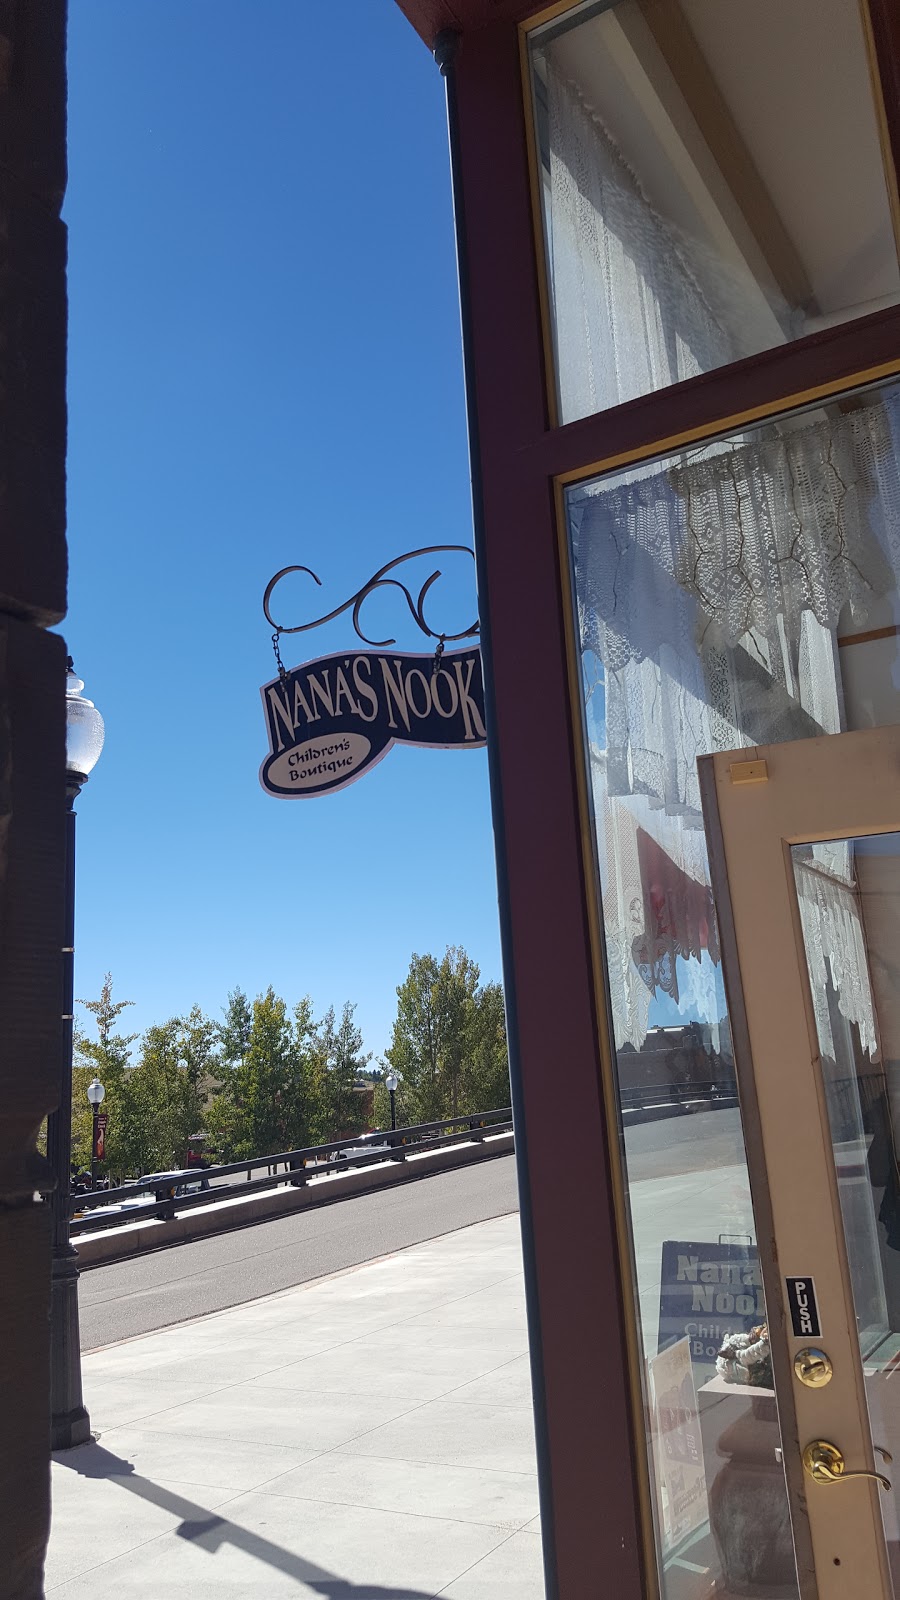 A picture of the store sign of "Nana's Nook" hanging outside the shop door